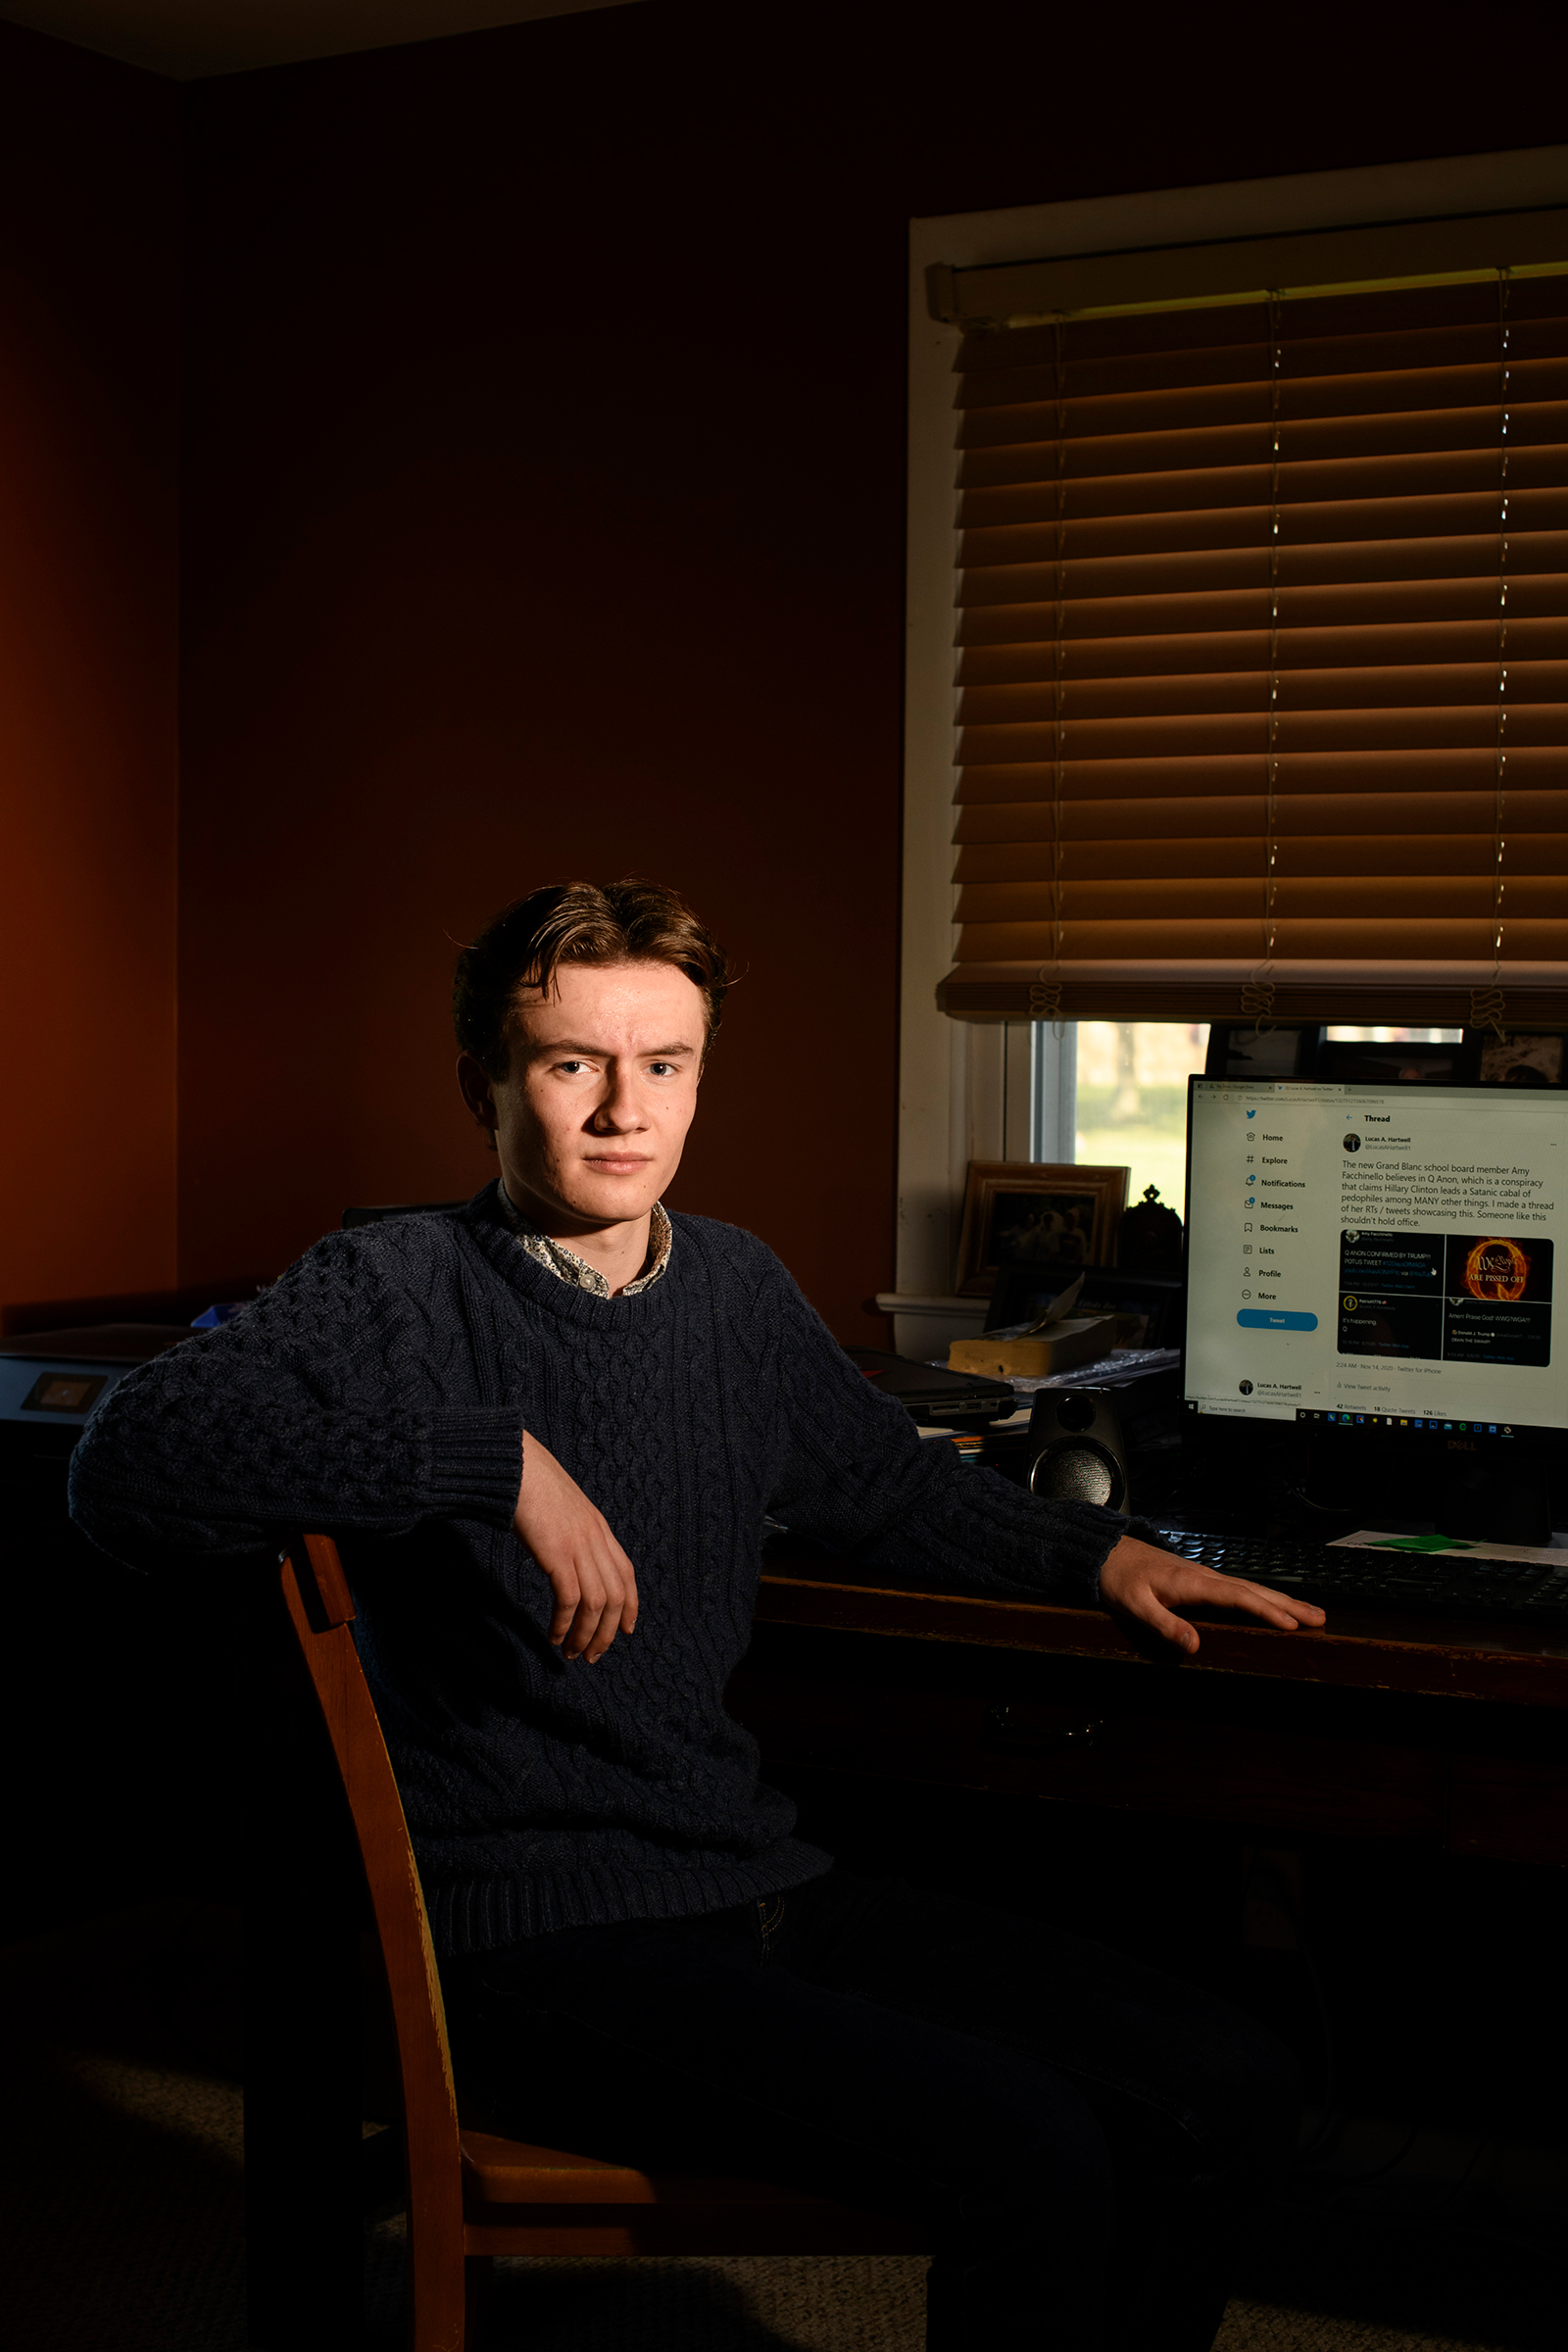 Lucas Hartwell, a senior at Grand Blanc Community High School, in the room he uses as his work space in Grand Blanc, Mich. (Brittany Greeson for TIME)